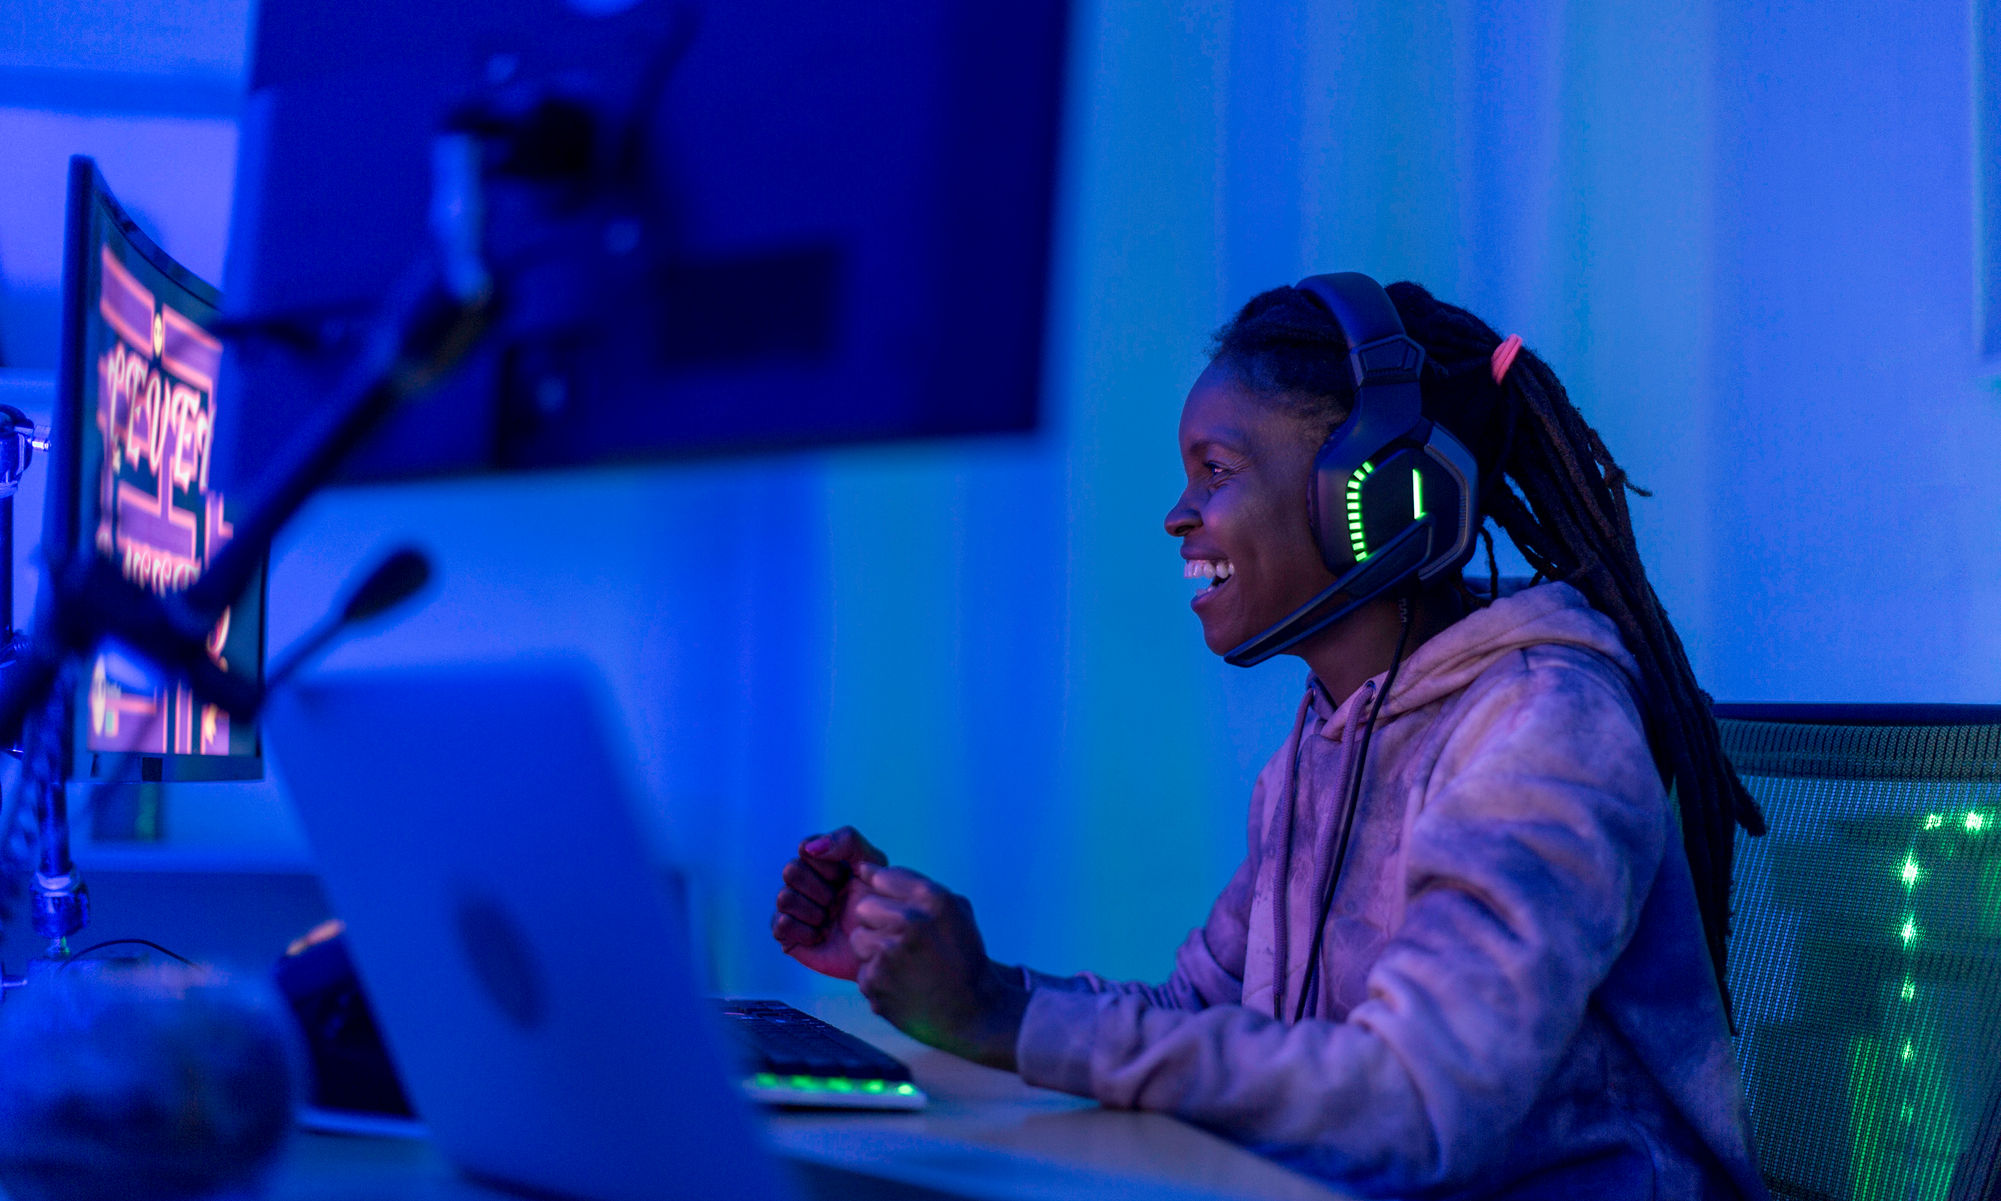 young woman gamer wearing headphones while playing on a pc